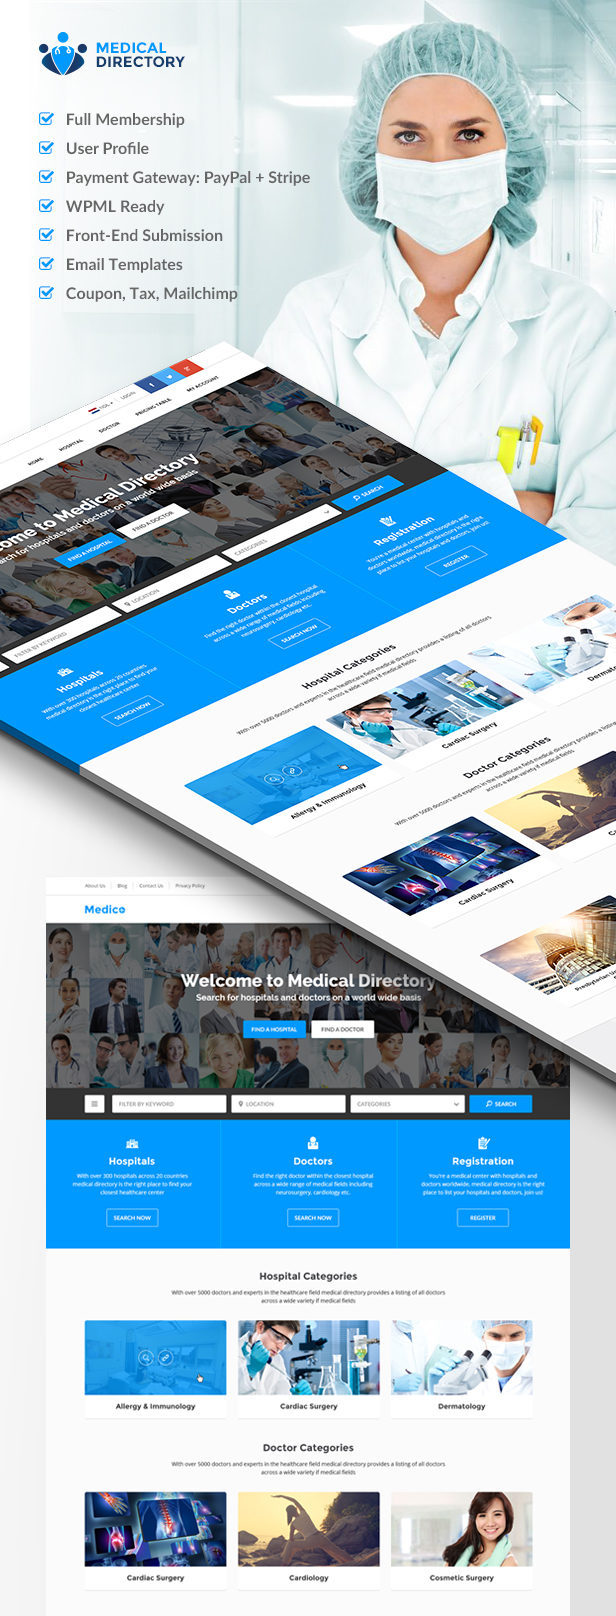 Medical Directory - Hospitals & Doctors Listing Theme - 2